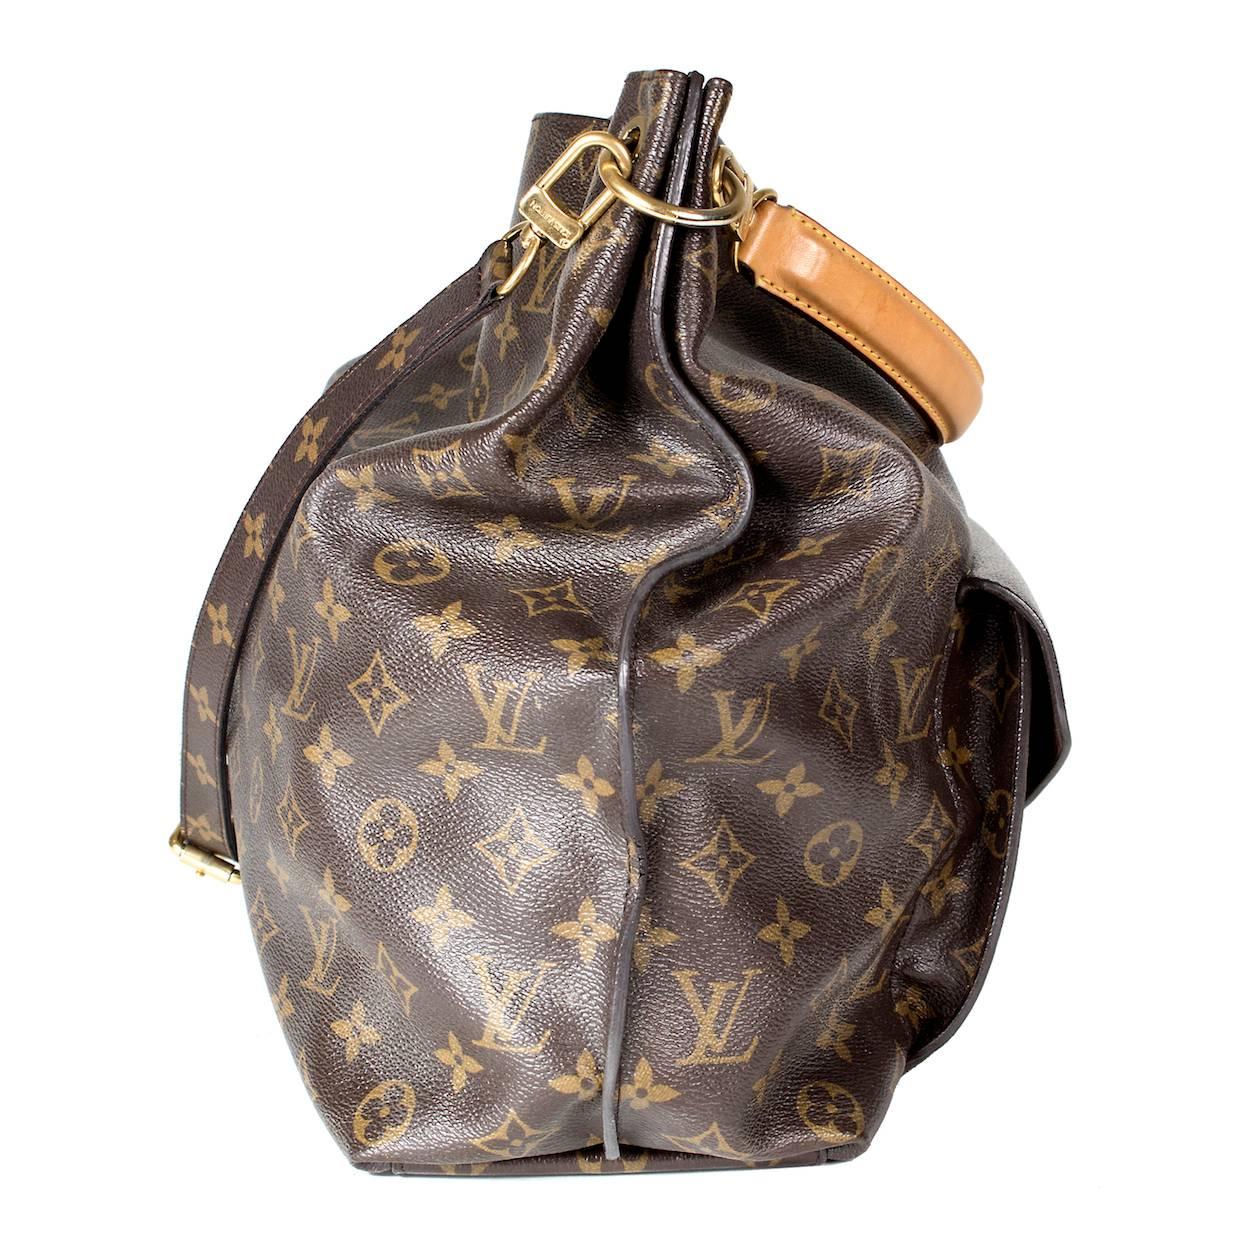 This is a contemporary leather monogram bag by Louis Vuitton.  It features a top handle as well as an adjustable shoulder strap.  It has an open top and the front features an envelope shaped pocket with gold lock clasp.  It is lined in brown suede